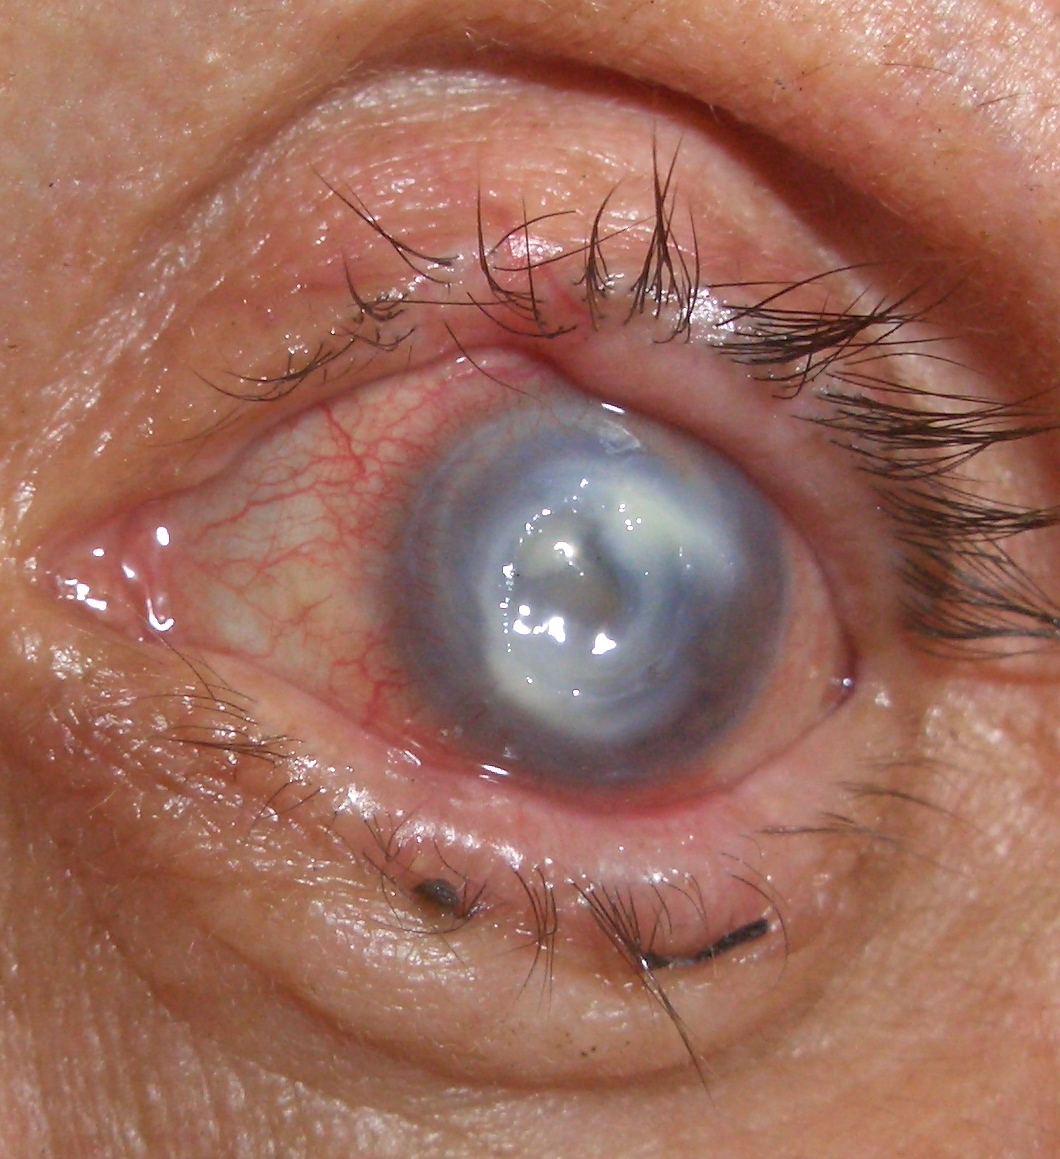 Infectious central corneal ulcer - American Academy of ...